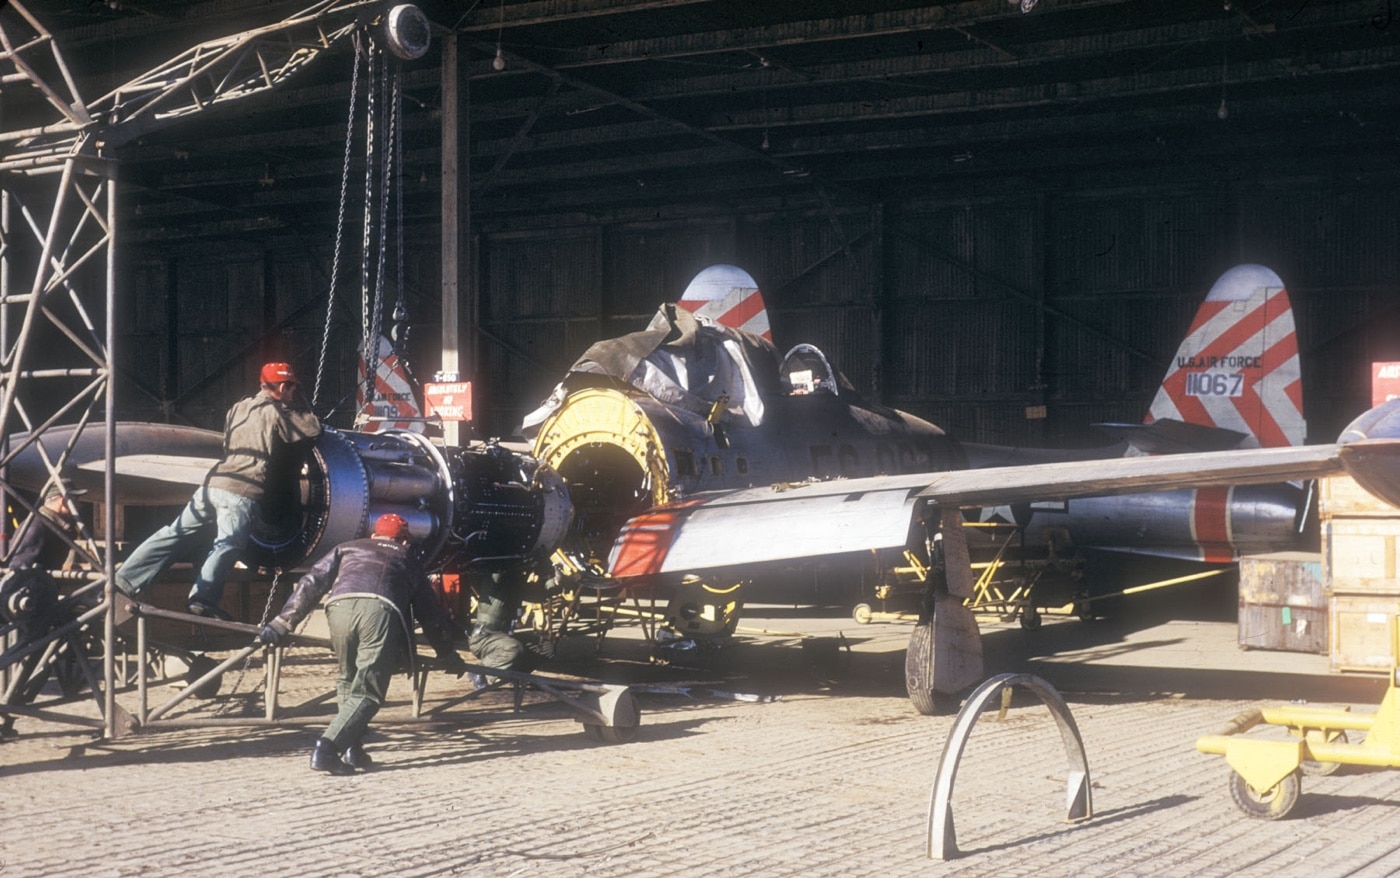 engine replacement on F-84 Thunderjet in South Korea